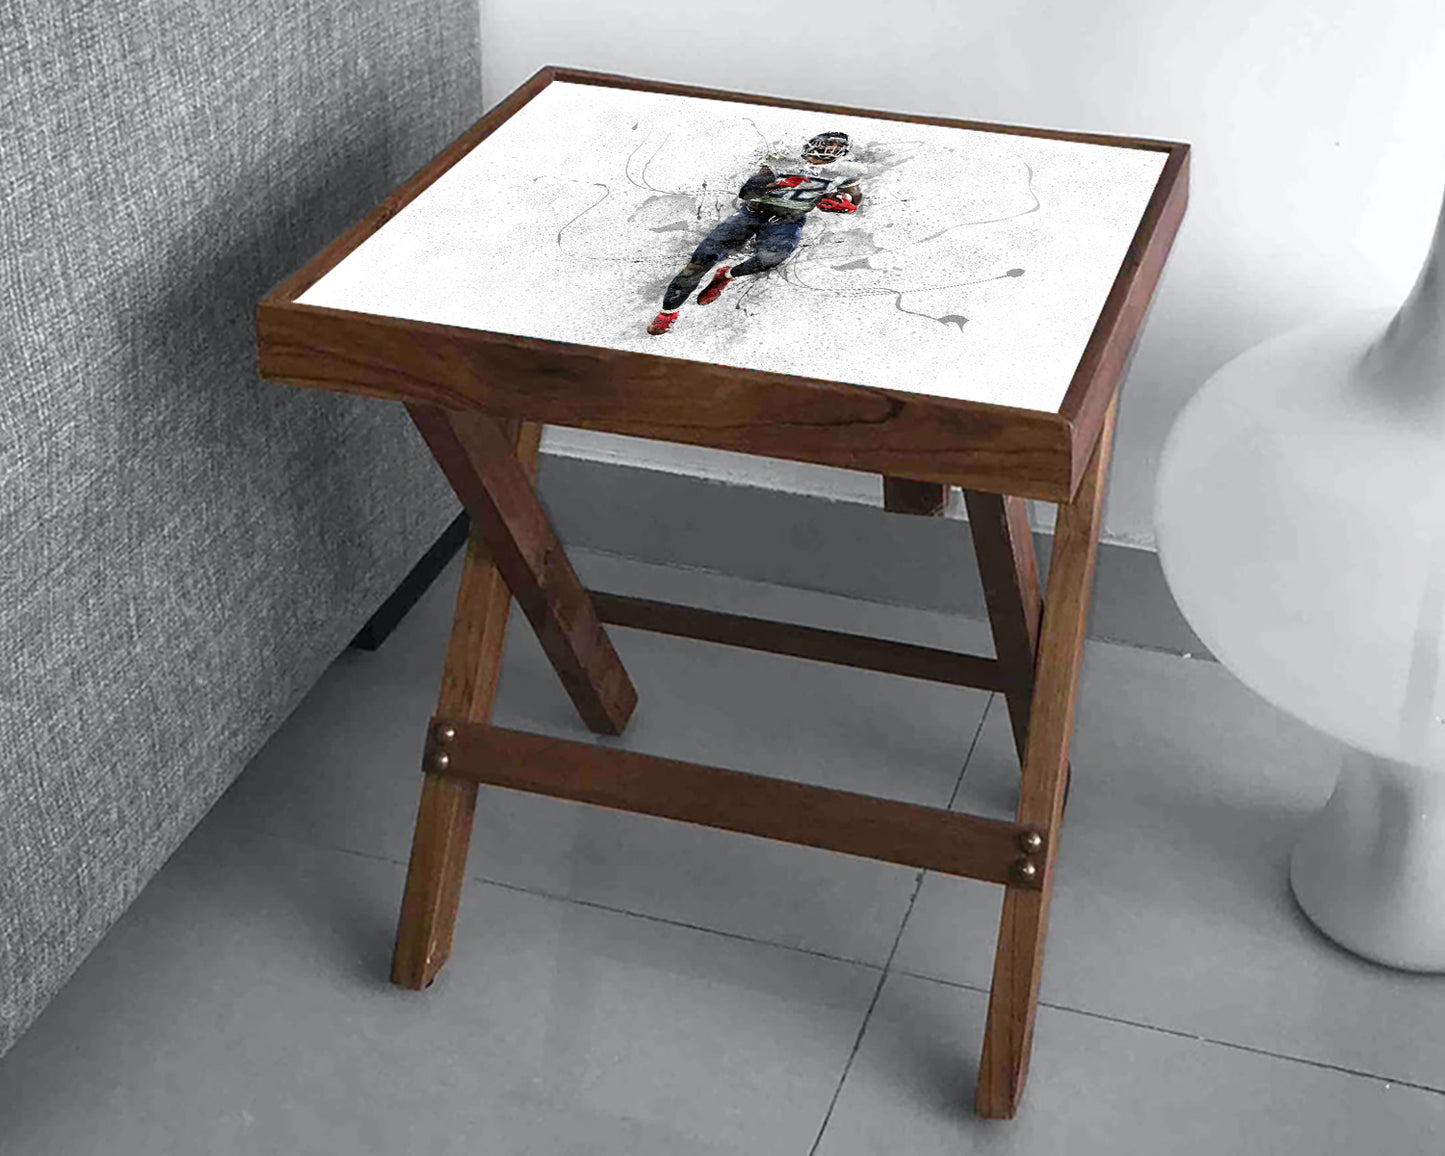 Derrick Henry Splash Effect Coffee and Laptop Table 